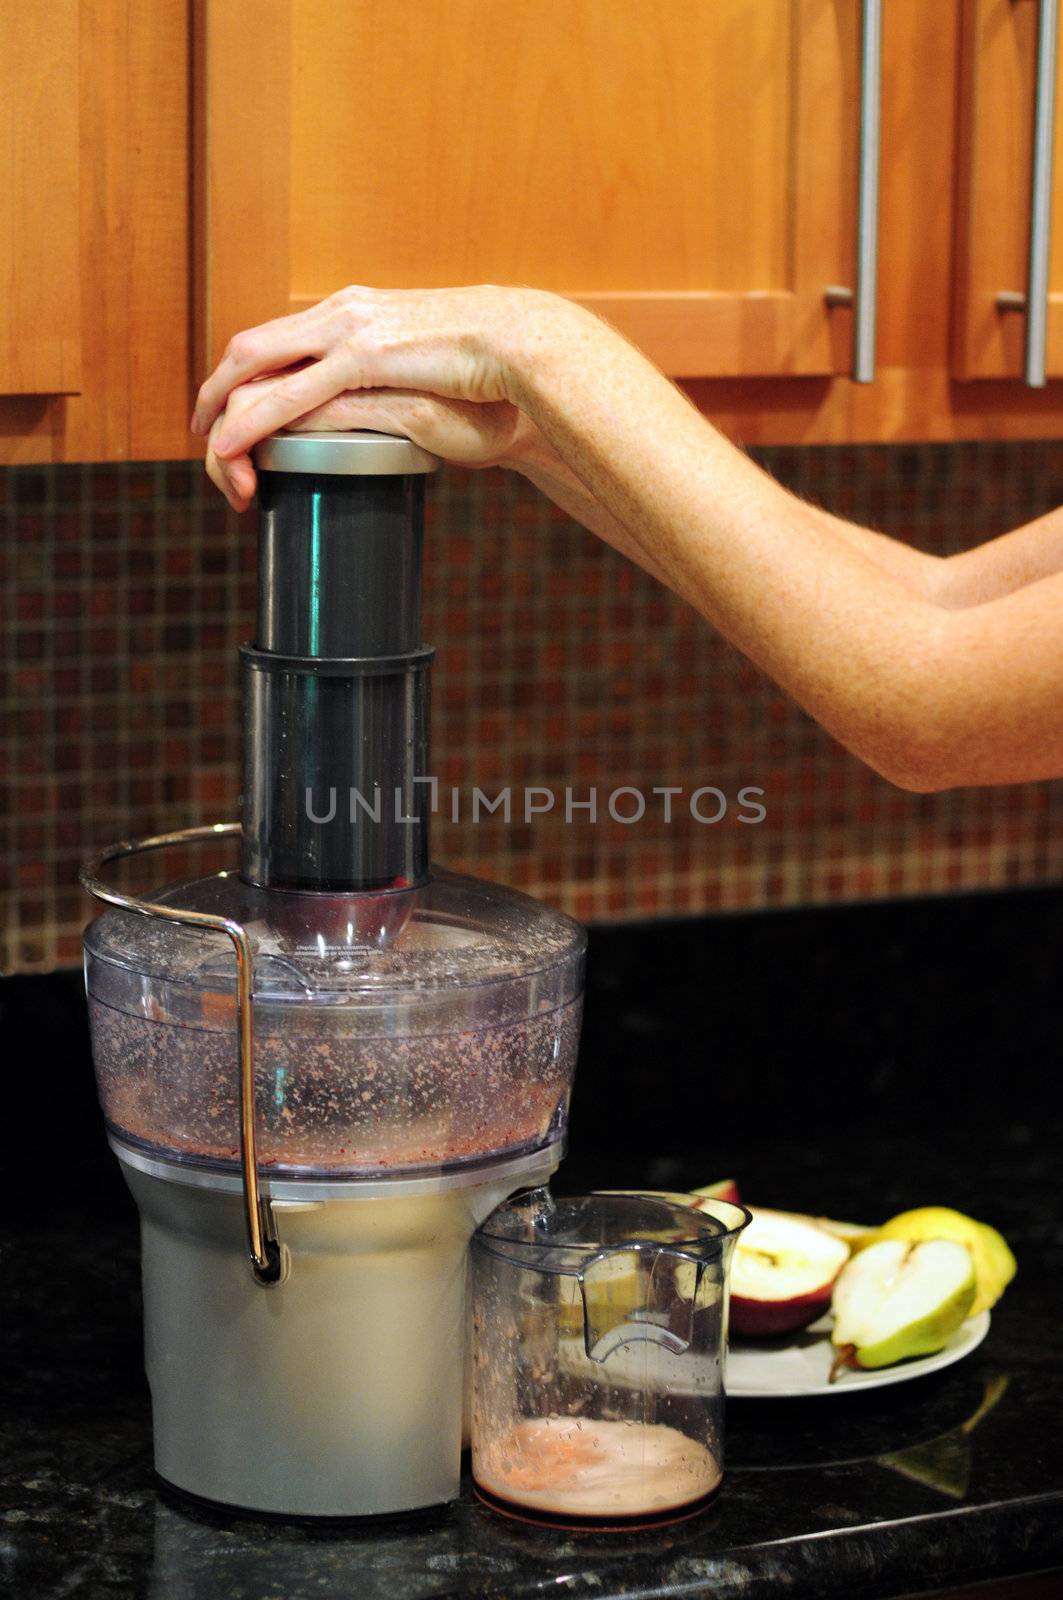 Juicing with juicer by ftlaudgirl